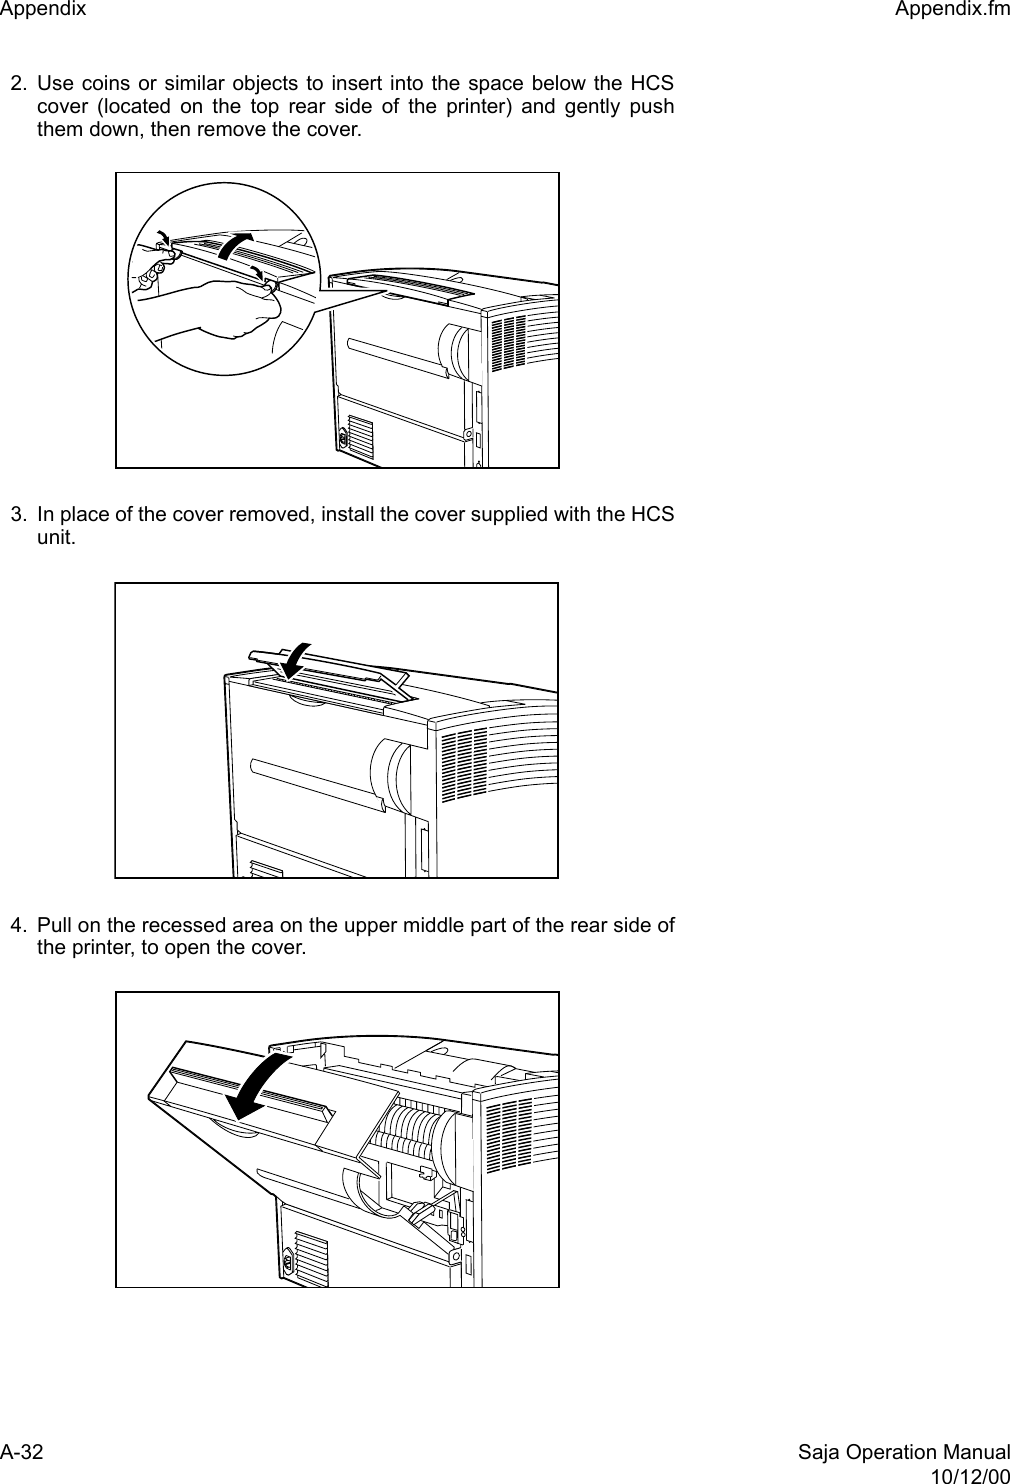 A-32 Saja Operation Manual10/12/00Appendix  Appendix.fm2. Use coins or similar objects to insert into the space below the HCScover (located on the top rear side of the printer) and gently pushthem down, then remove the cover.3. In place of the cover removed, install the cover supplied with the HCSunit.4. Pull on the recessed area on the upper middle part of the rear side ofthe printer, to open the cover. 